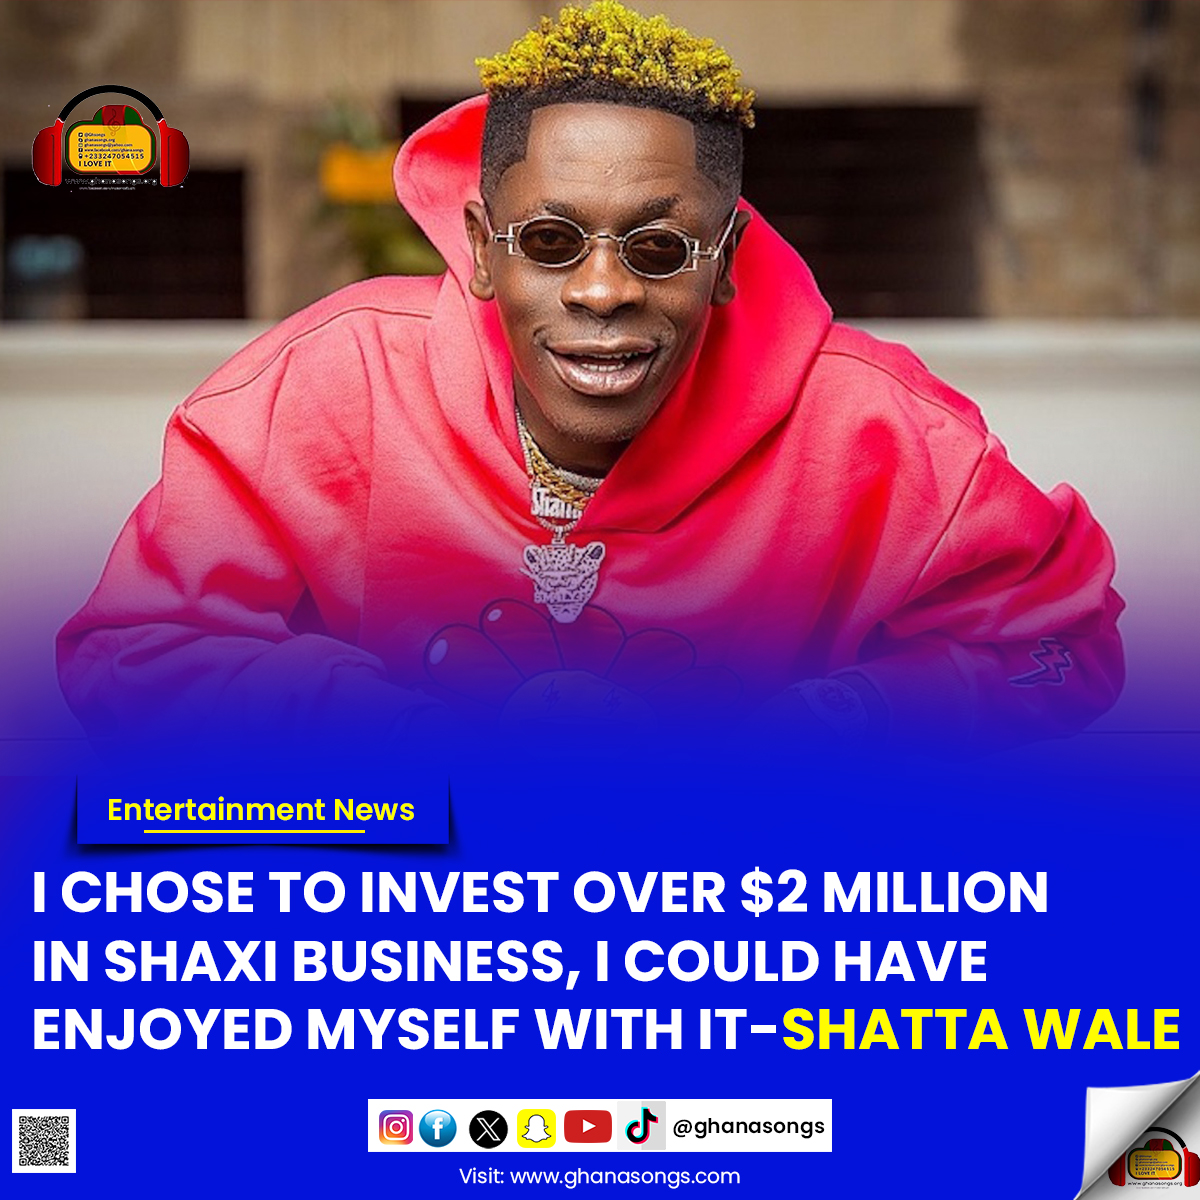 I Chose to invest over $2 million in Shaxi business, I could have enjoyed myself with it - Shatta Wale